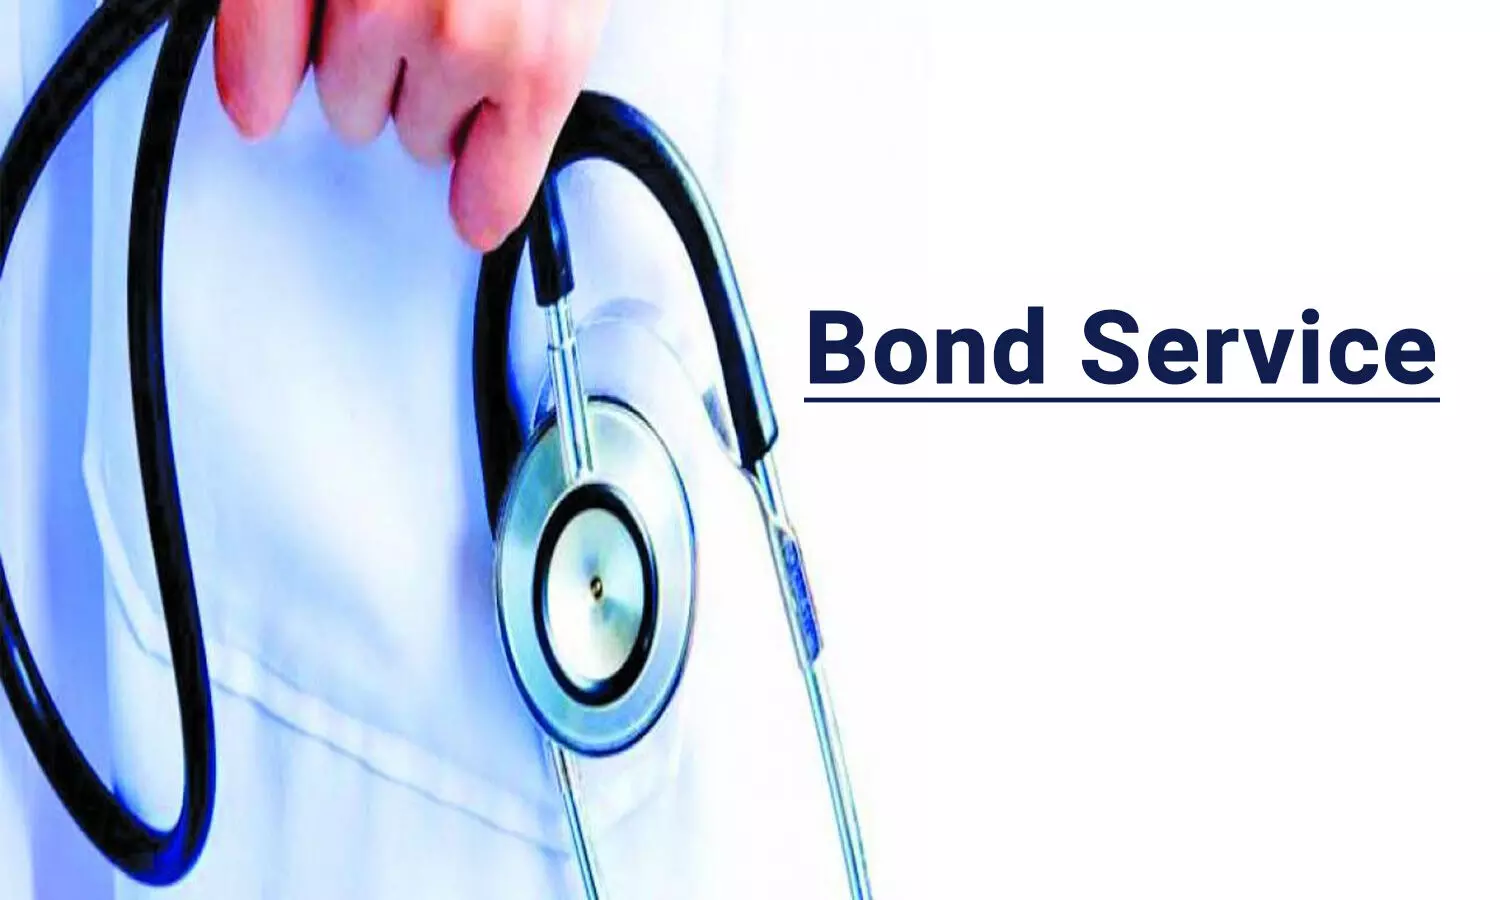 Allotment of Bond Services for SS Courses: DMER releases schedule, eligibility criteria, instructions